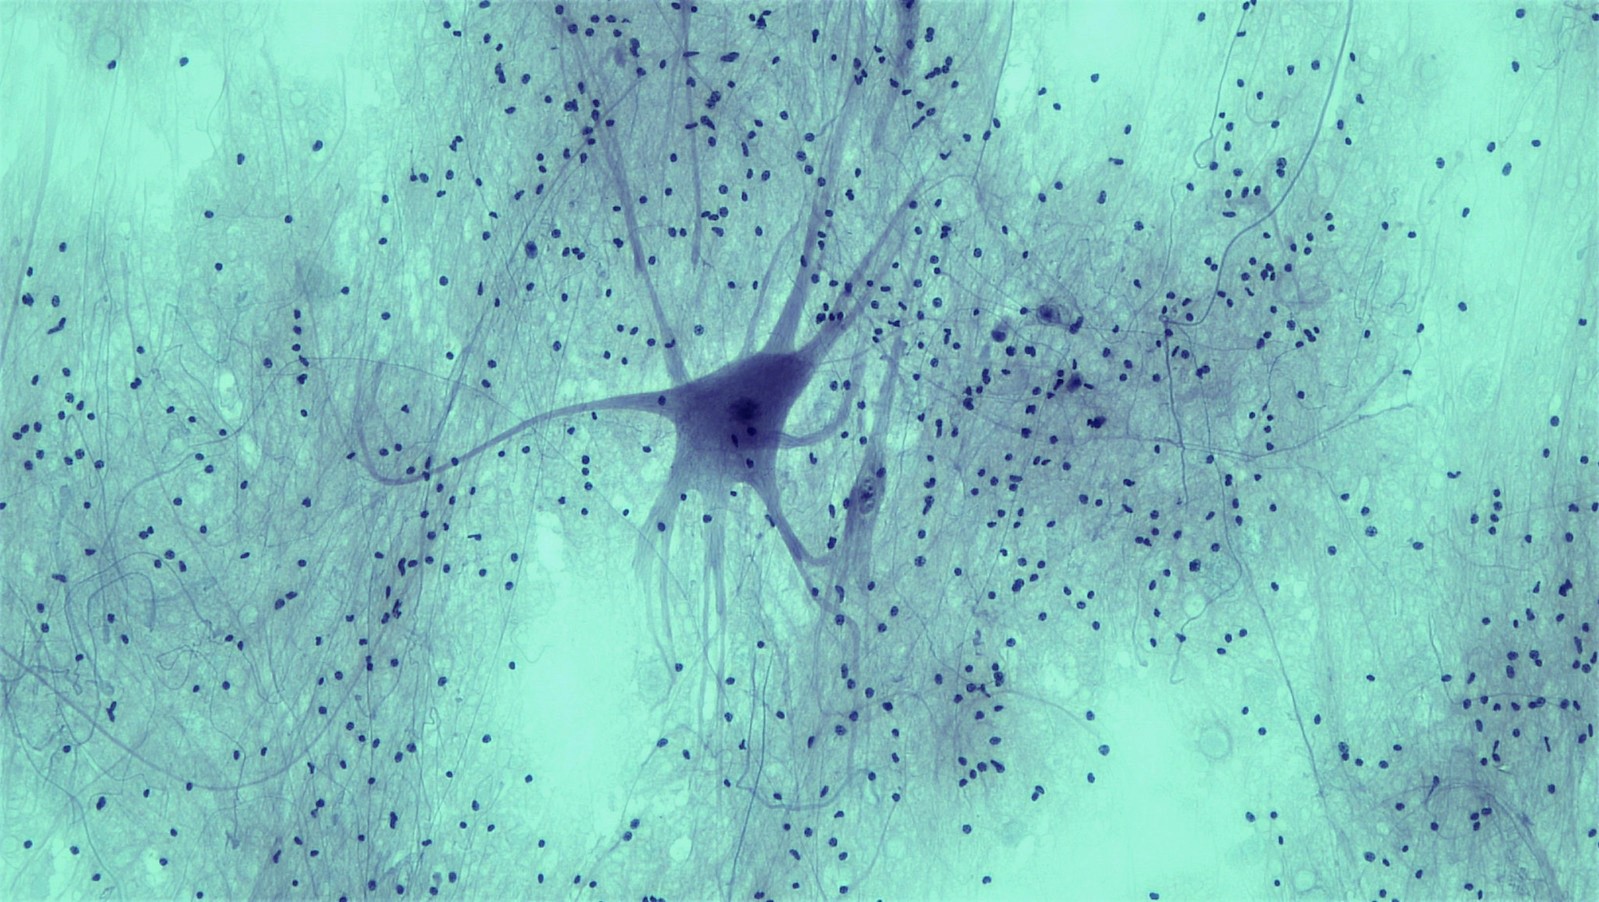 spinal cord neuron cell